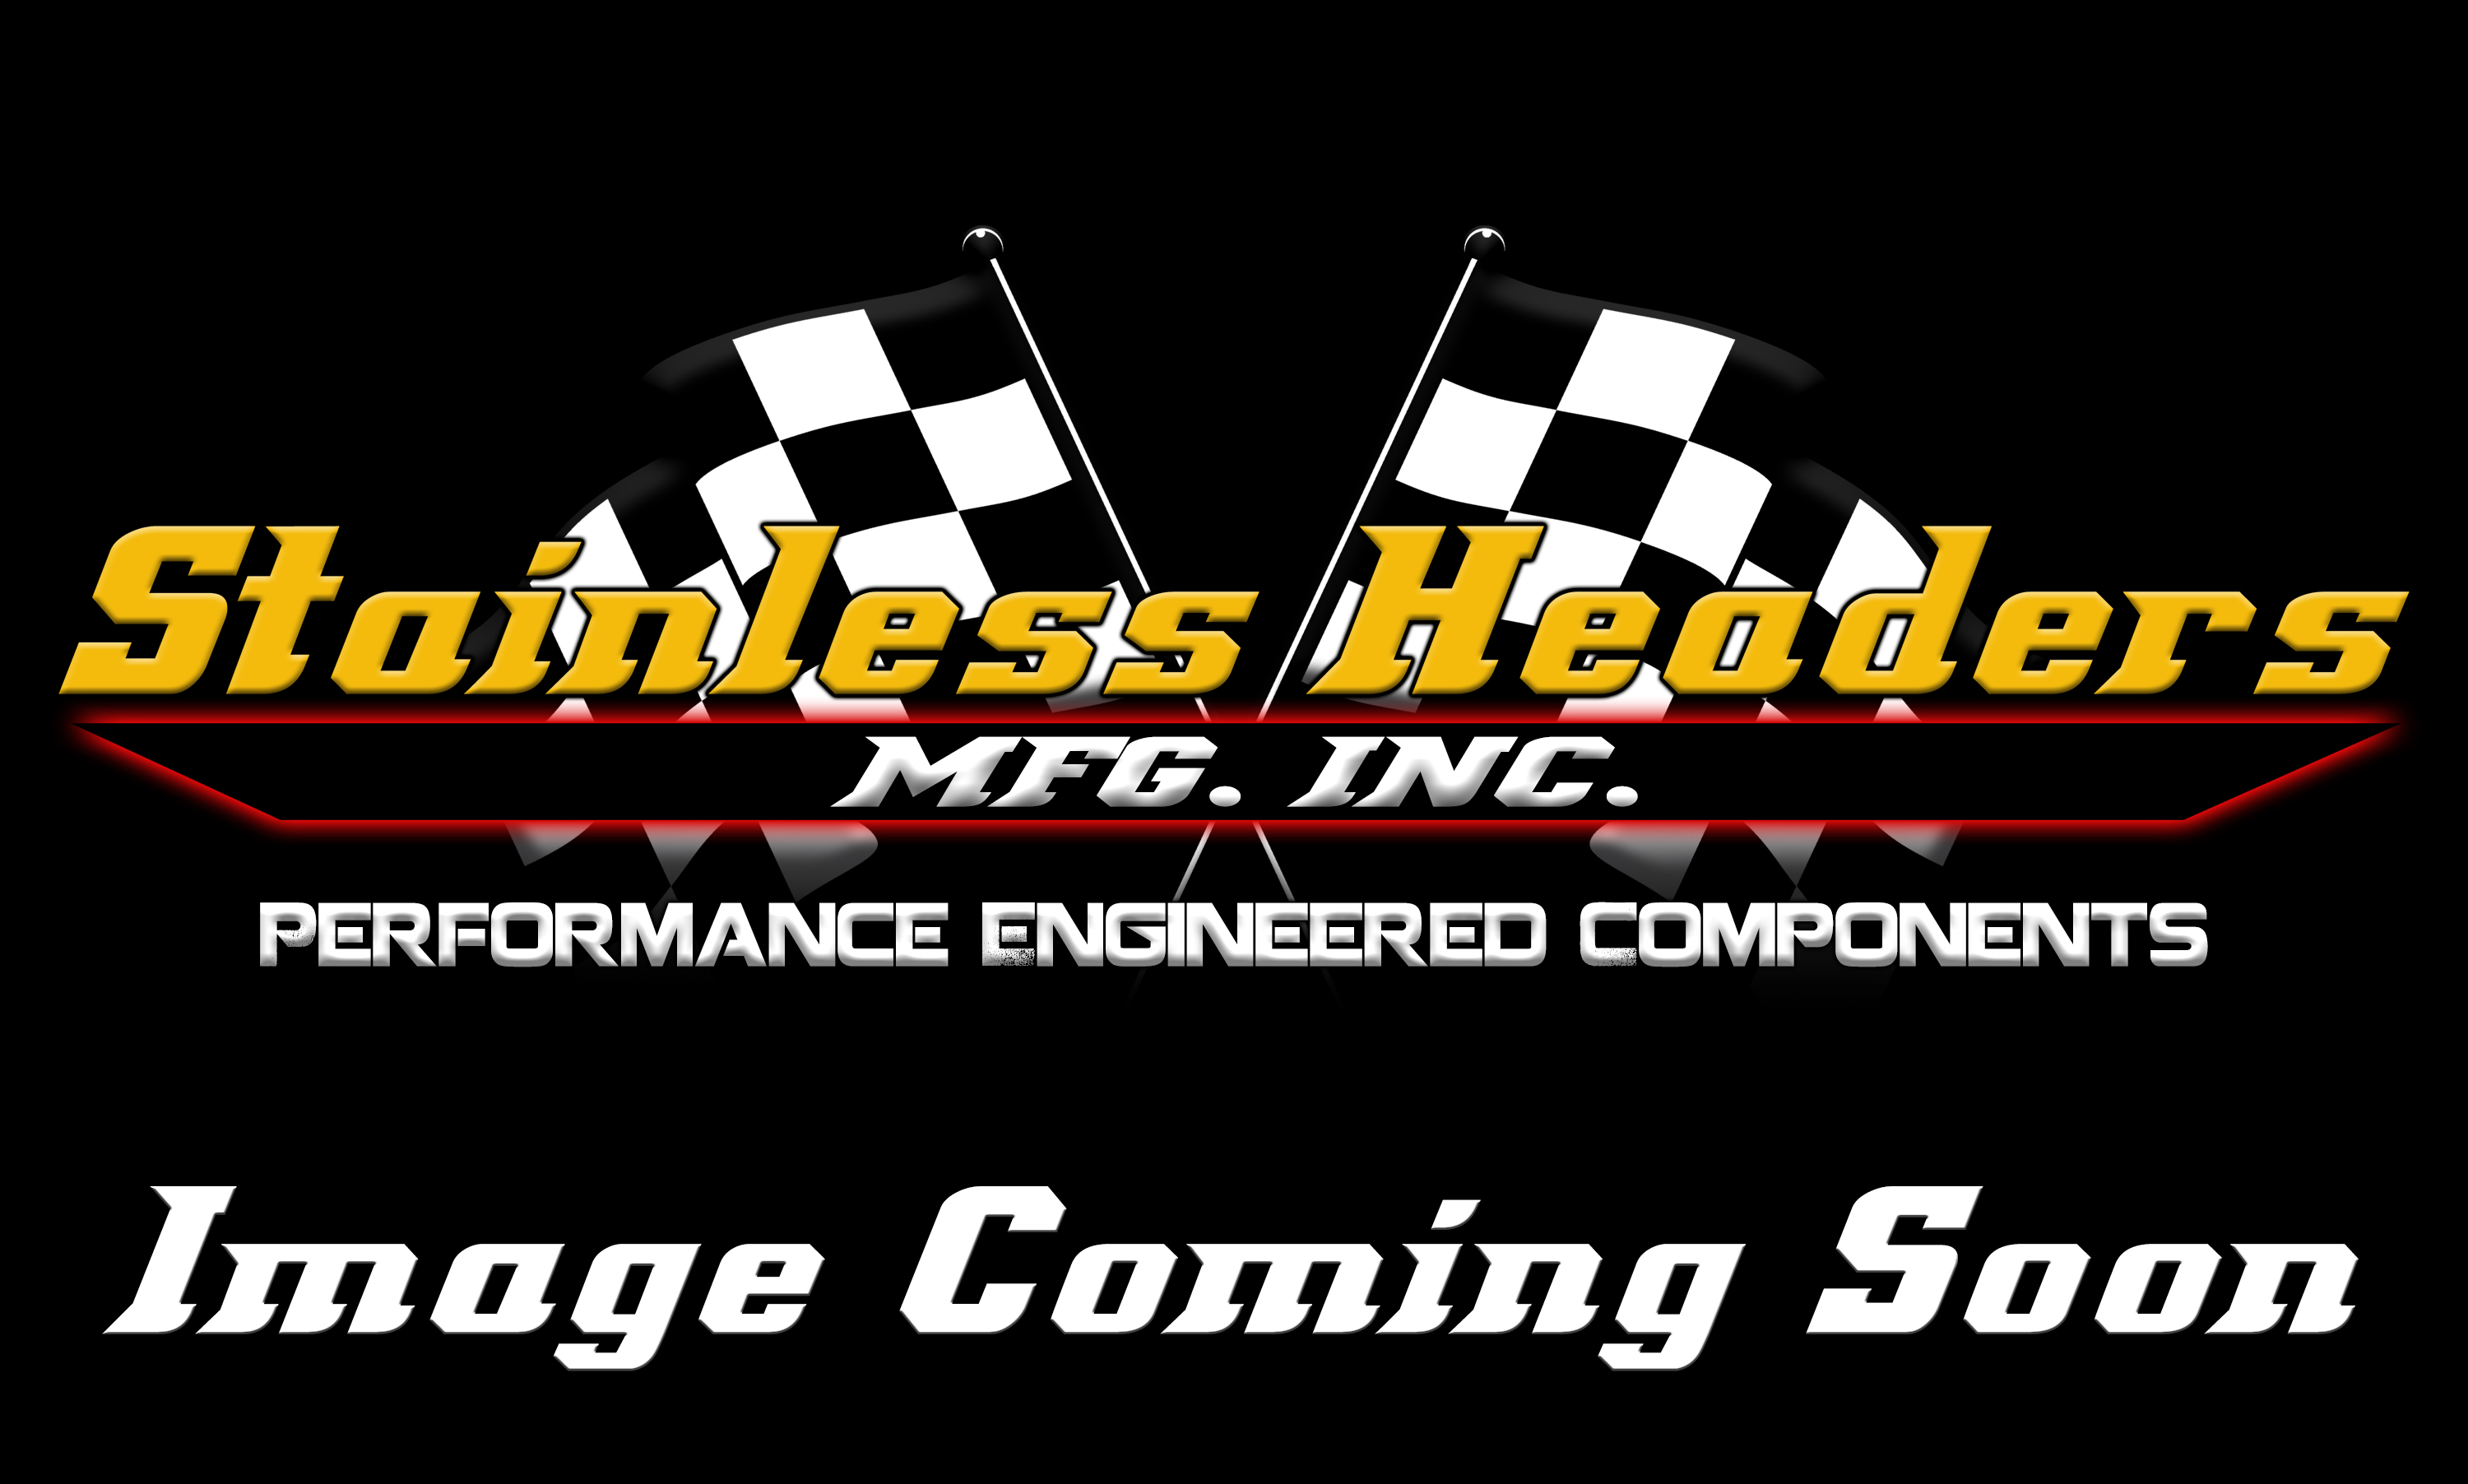 Custom Header Components - Merge Collectors - Stainless Headers - 1 1/2" Primary 2 into 1 Performance Merge Collector-16ga 321ss